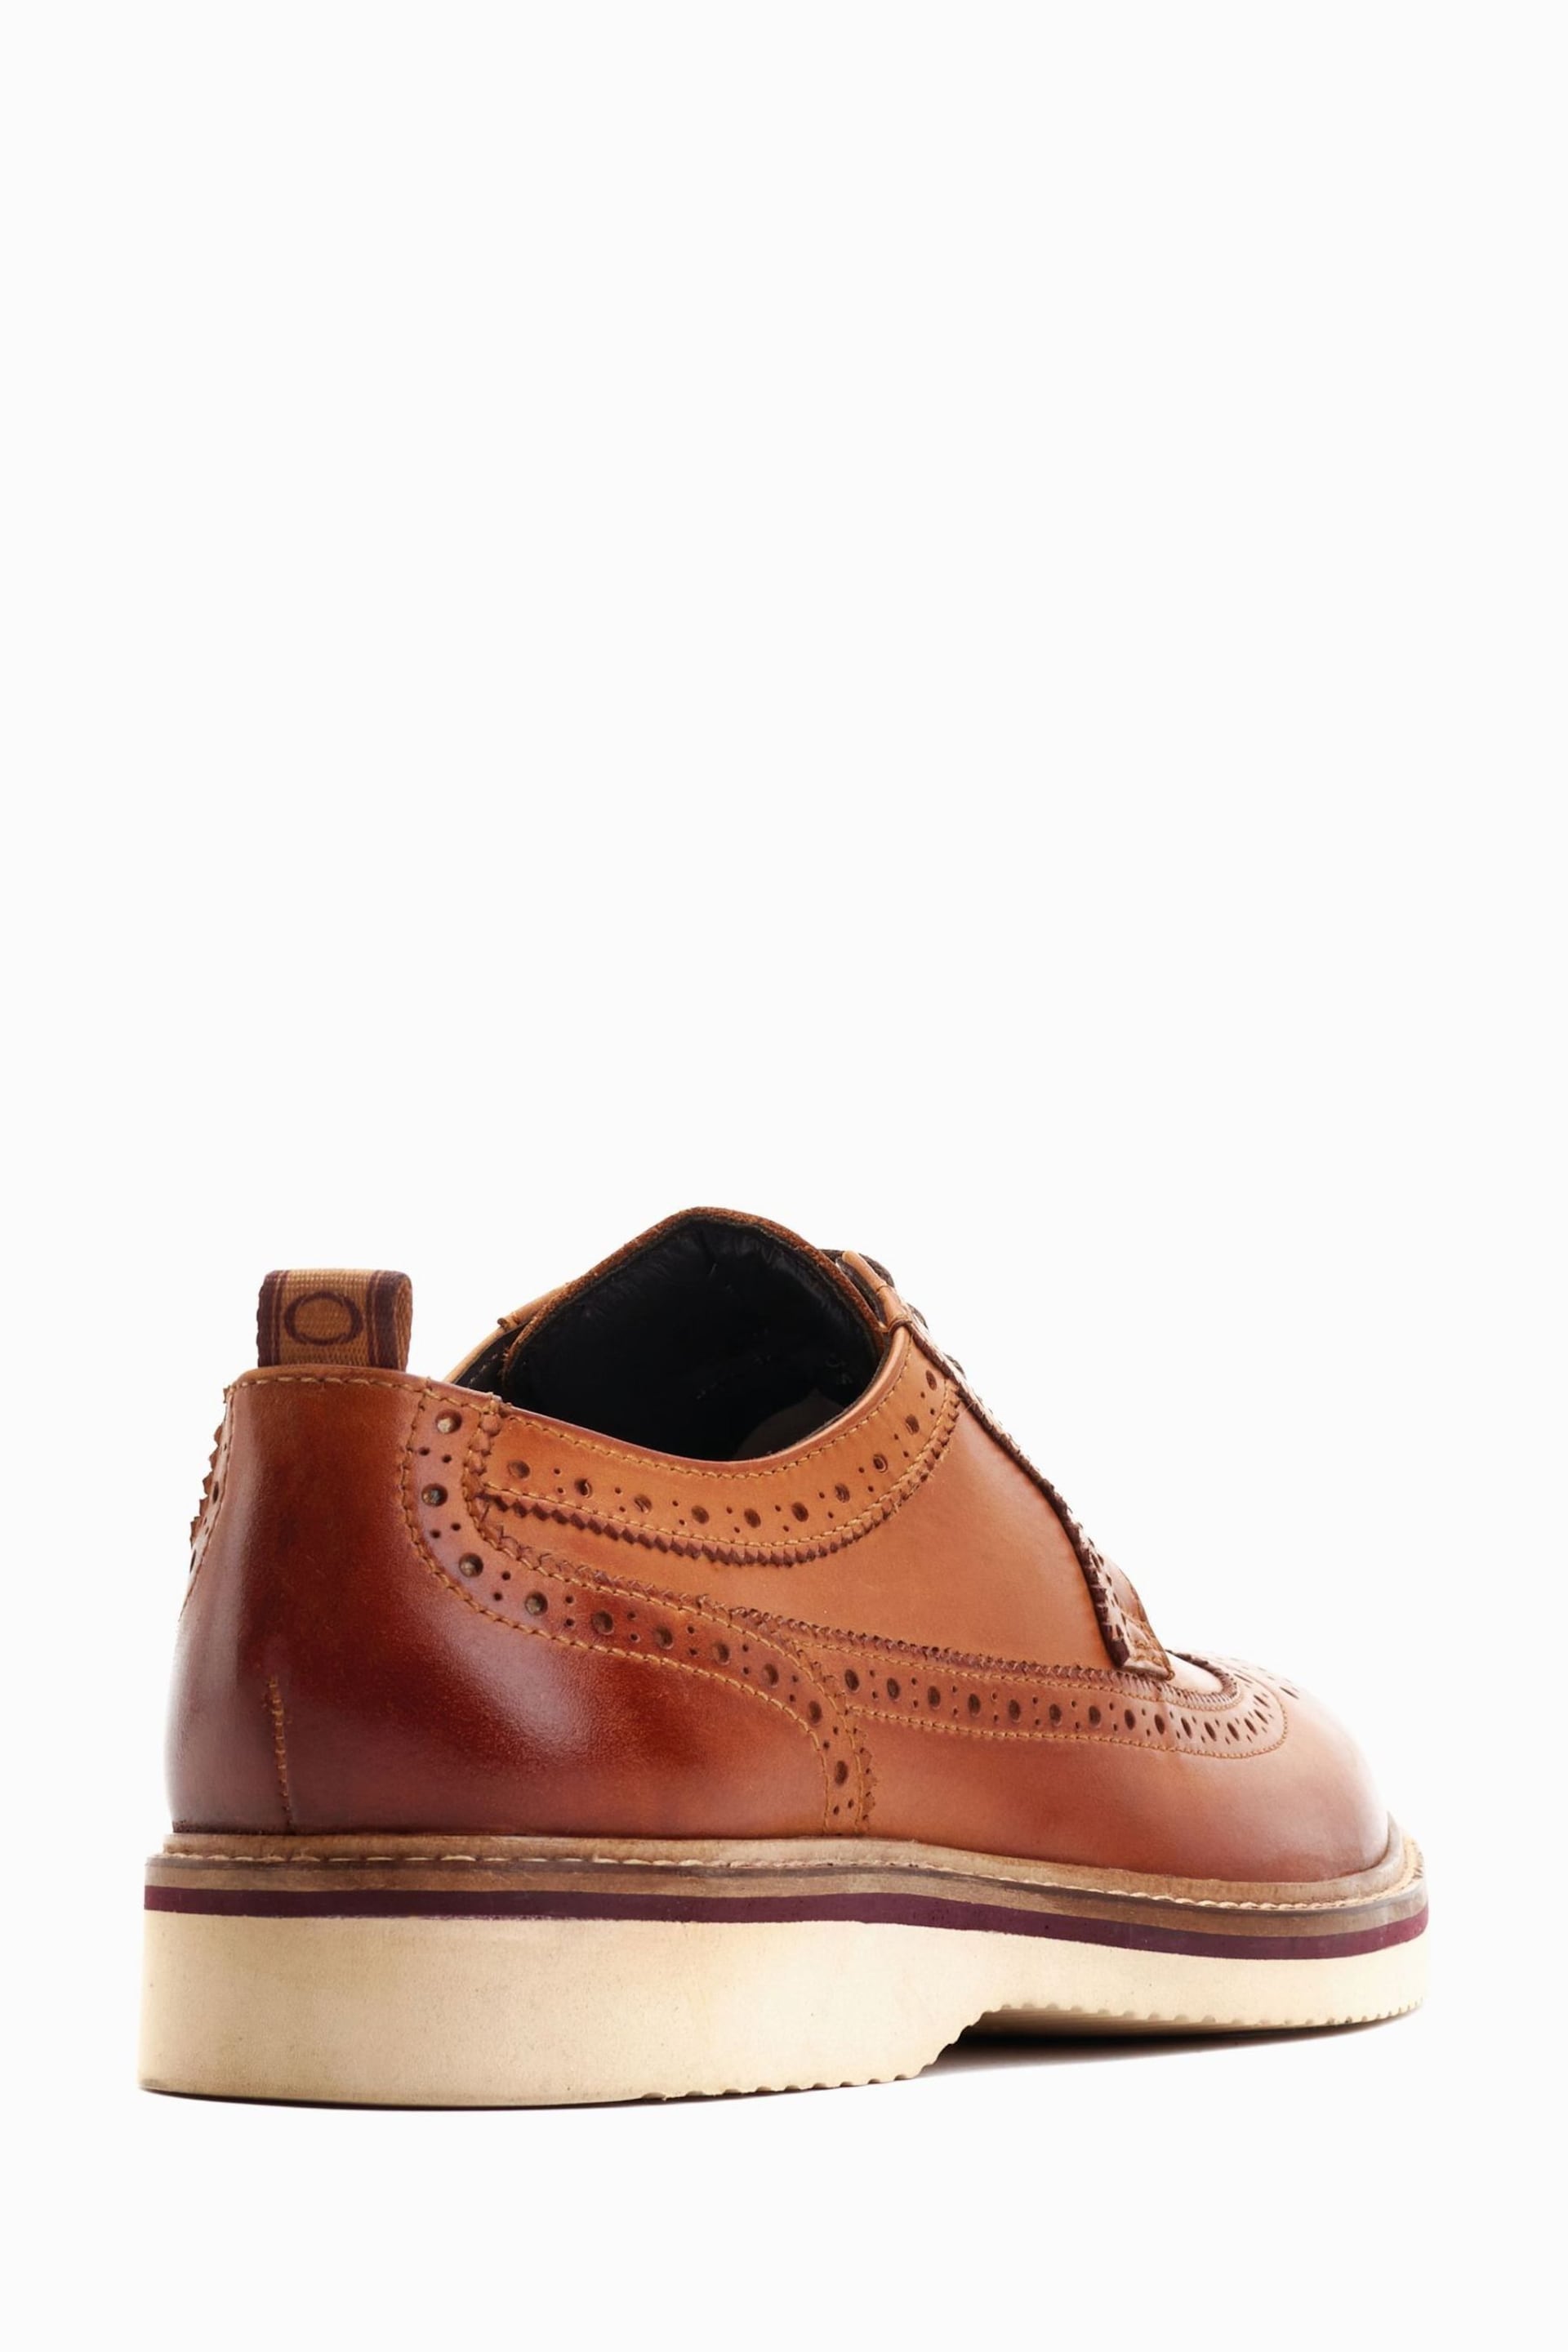 Base London Sully Lace Up Brogue Shoes - Image 2 of 6